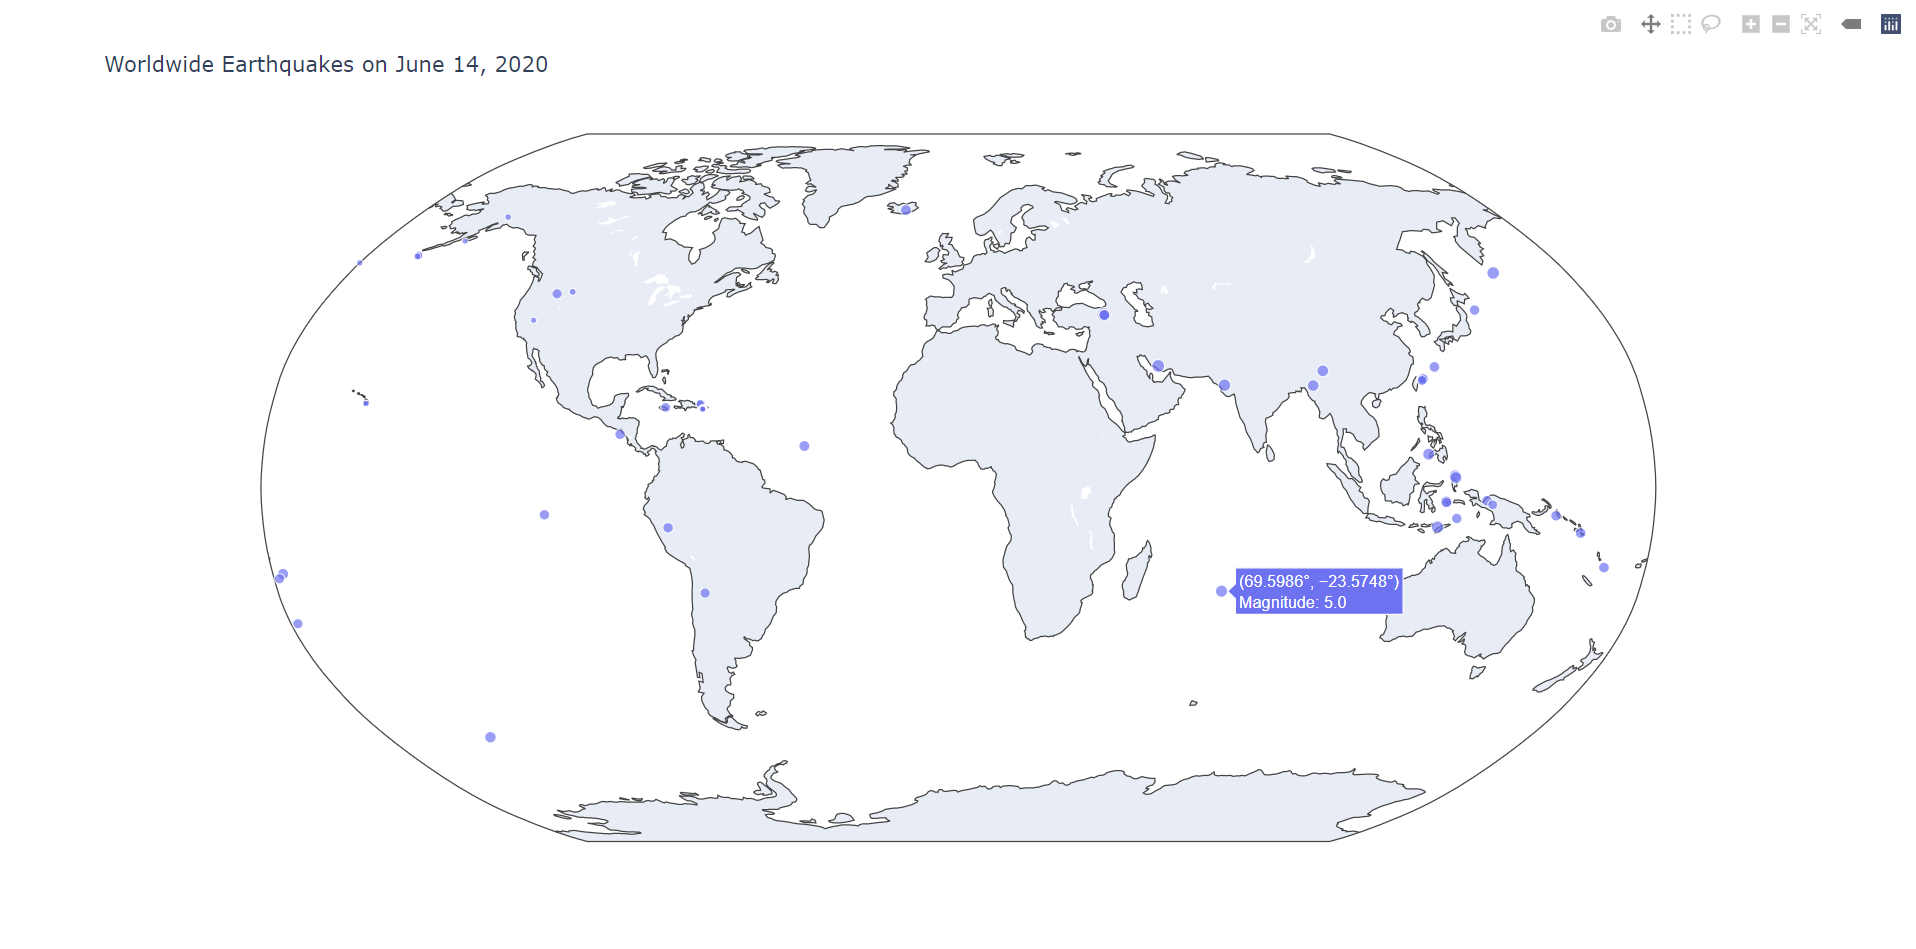 World map depicting earthquakes on June 14, 2020